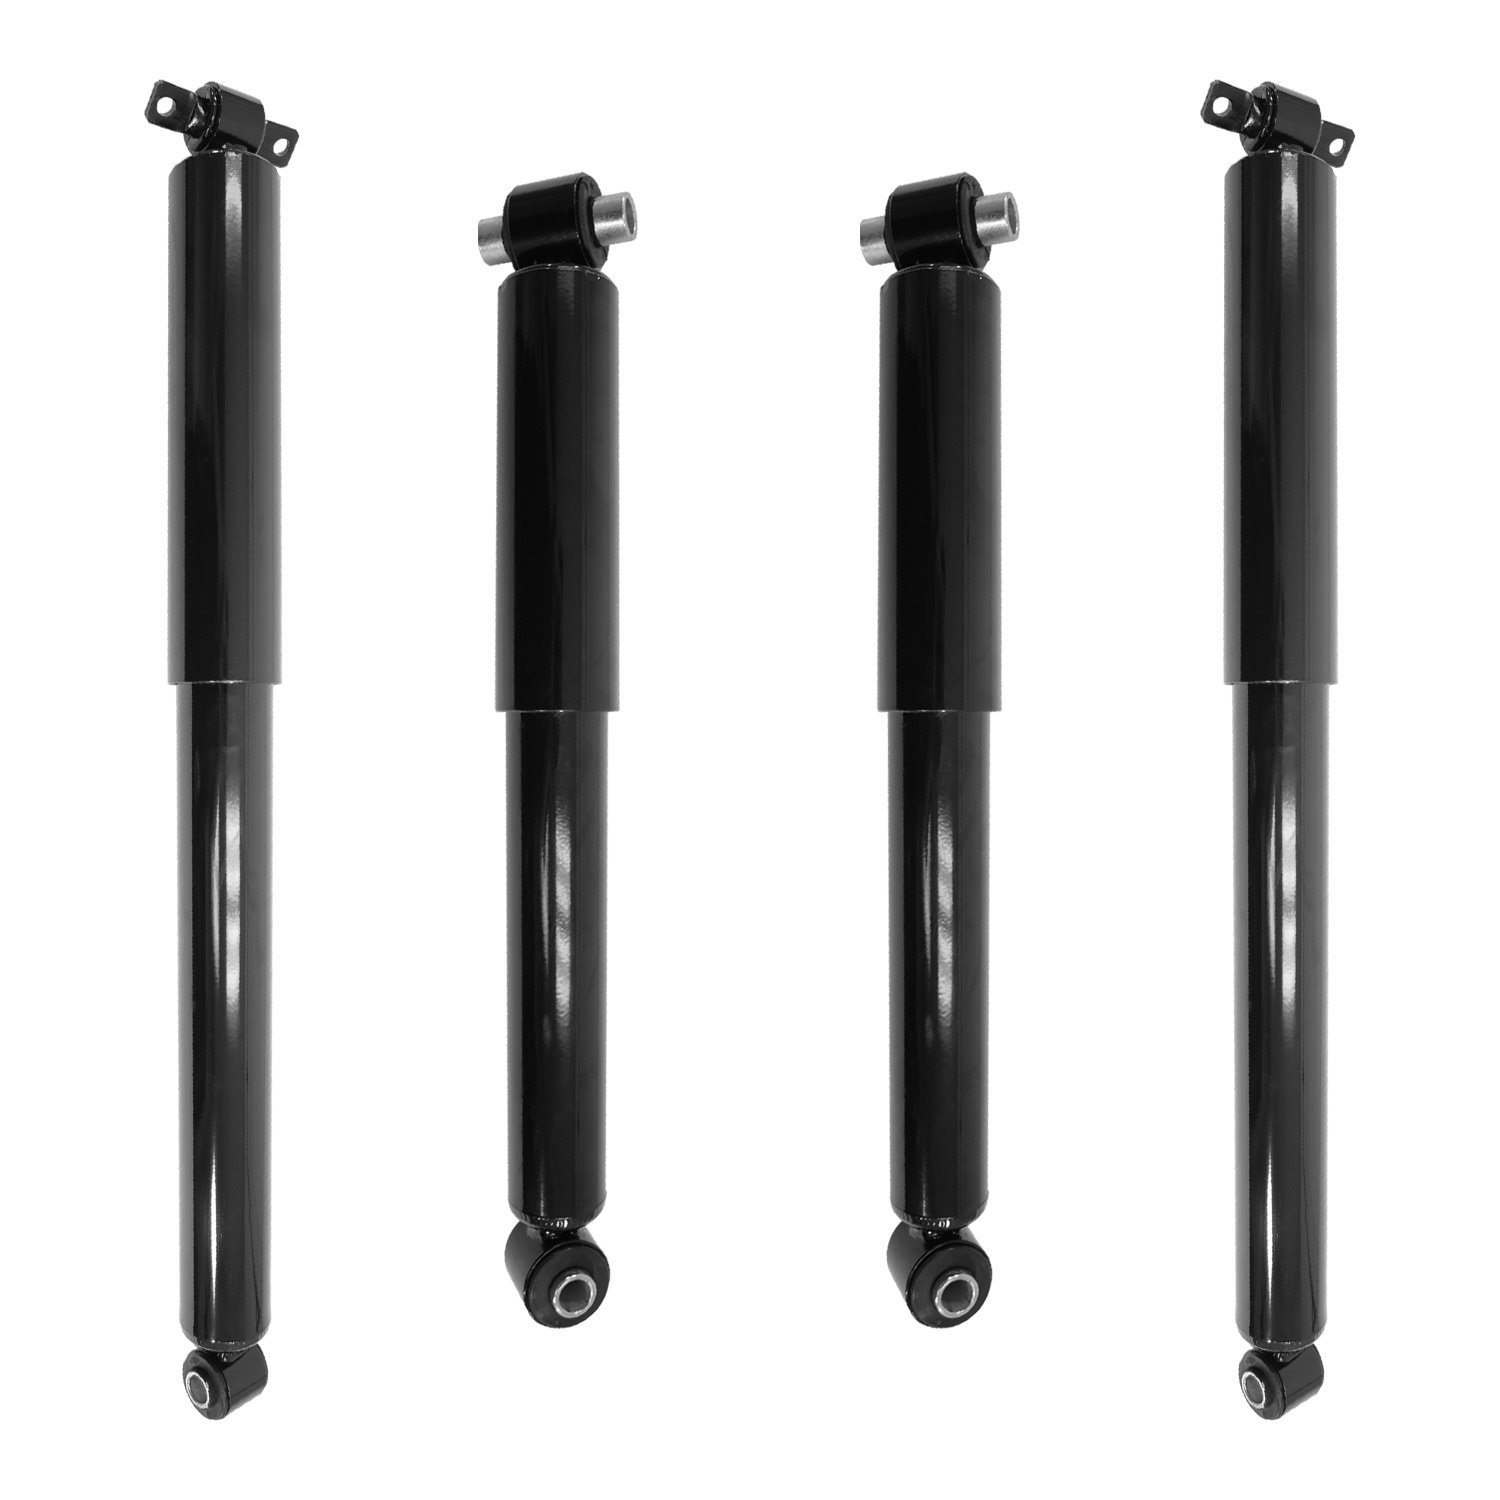 4-211160-251250-001 Front & Rear Nitrogen Gas Shock Absorber Kit Fits Select Chevy K1500, Chevy K2500, Chevy K3500